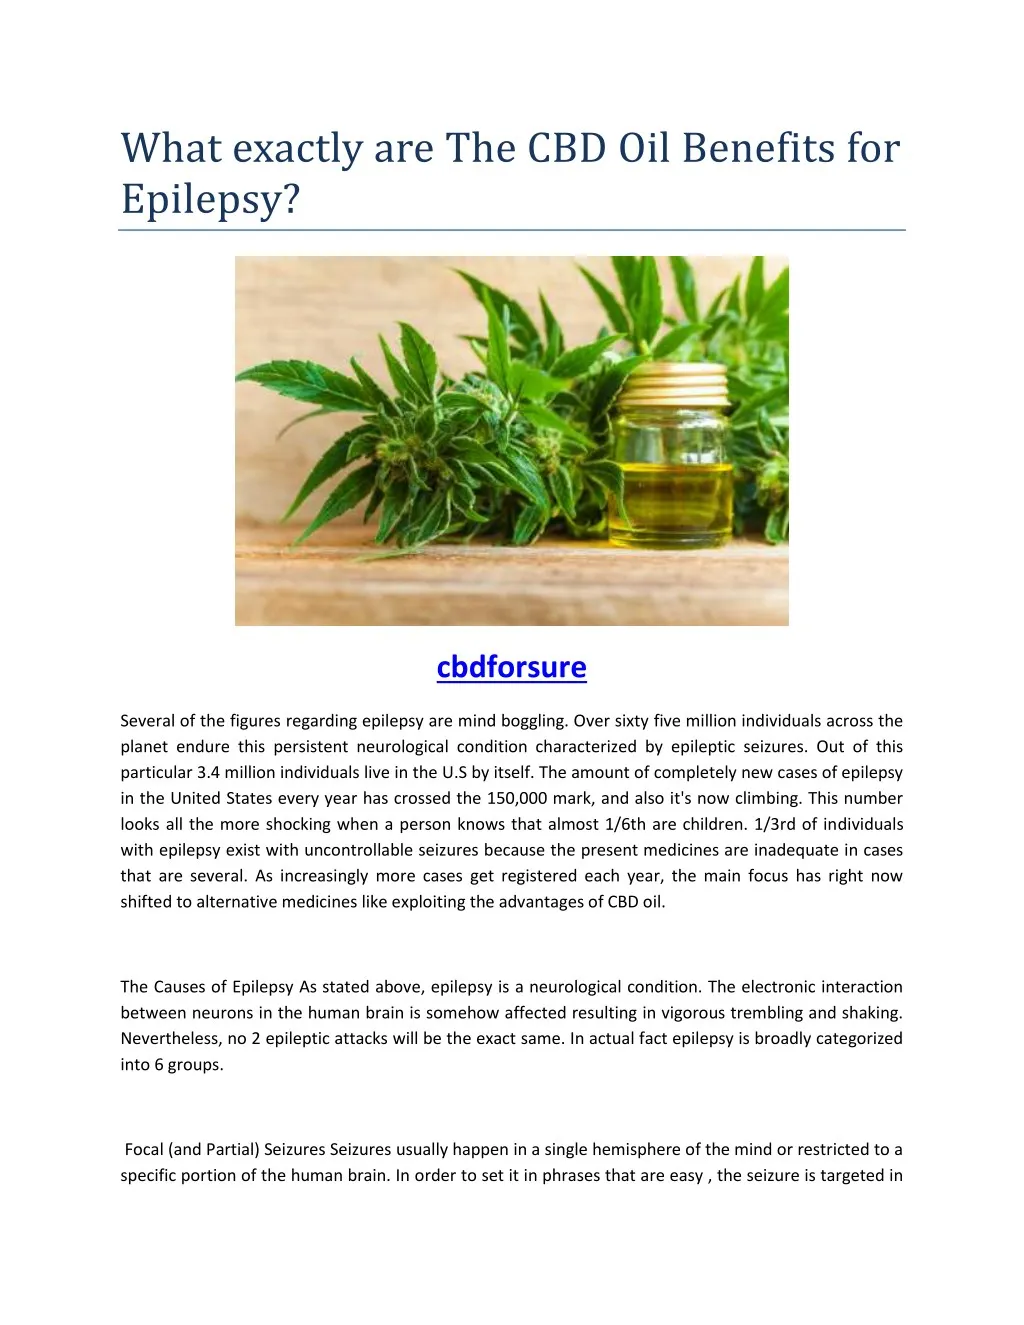 what exactly are the cbd oil benefits for epilepsy